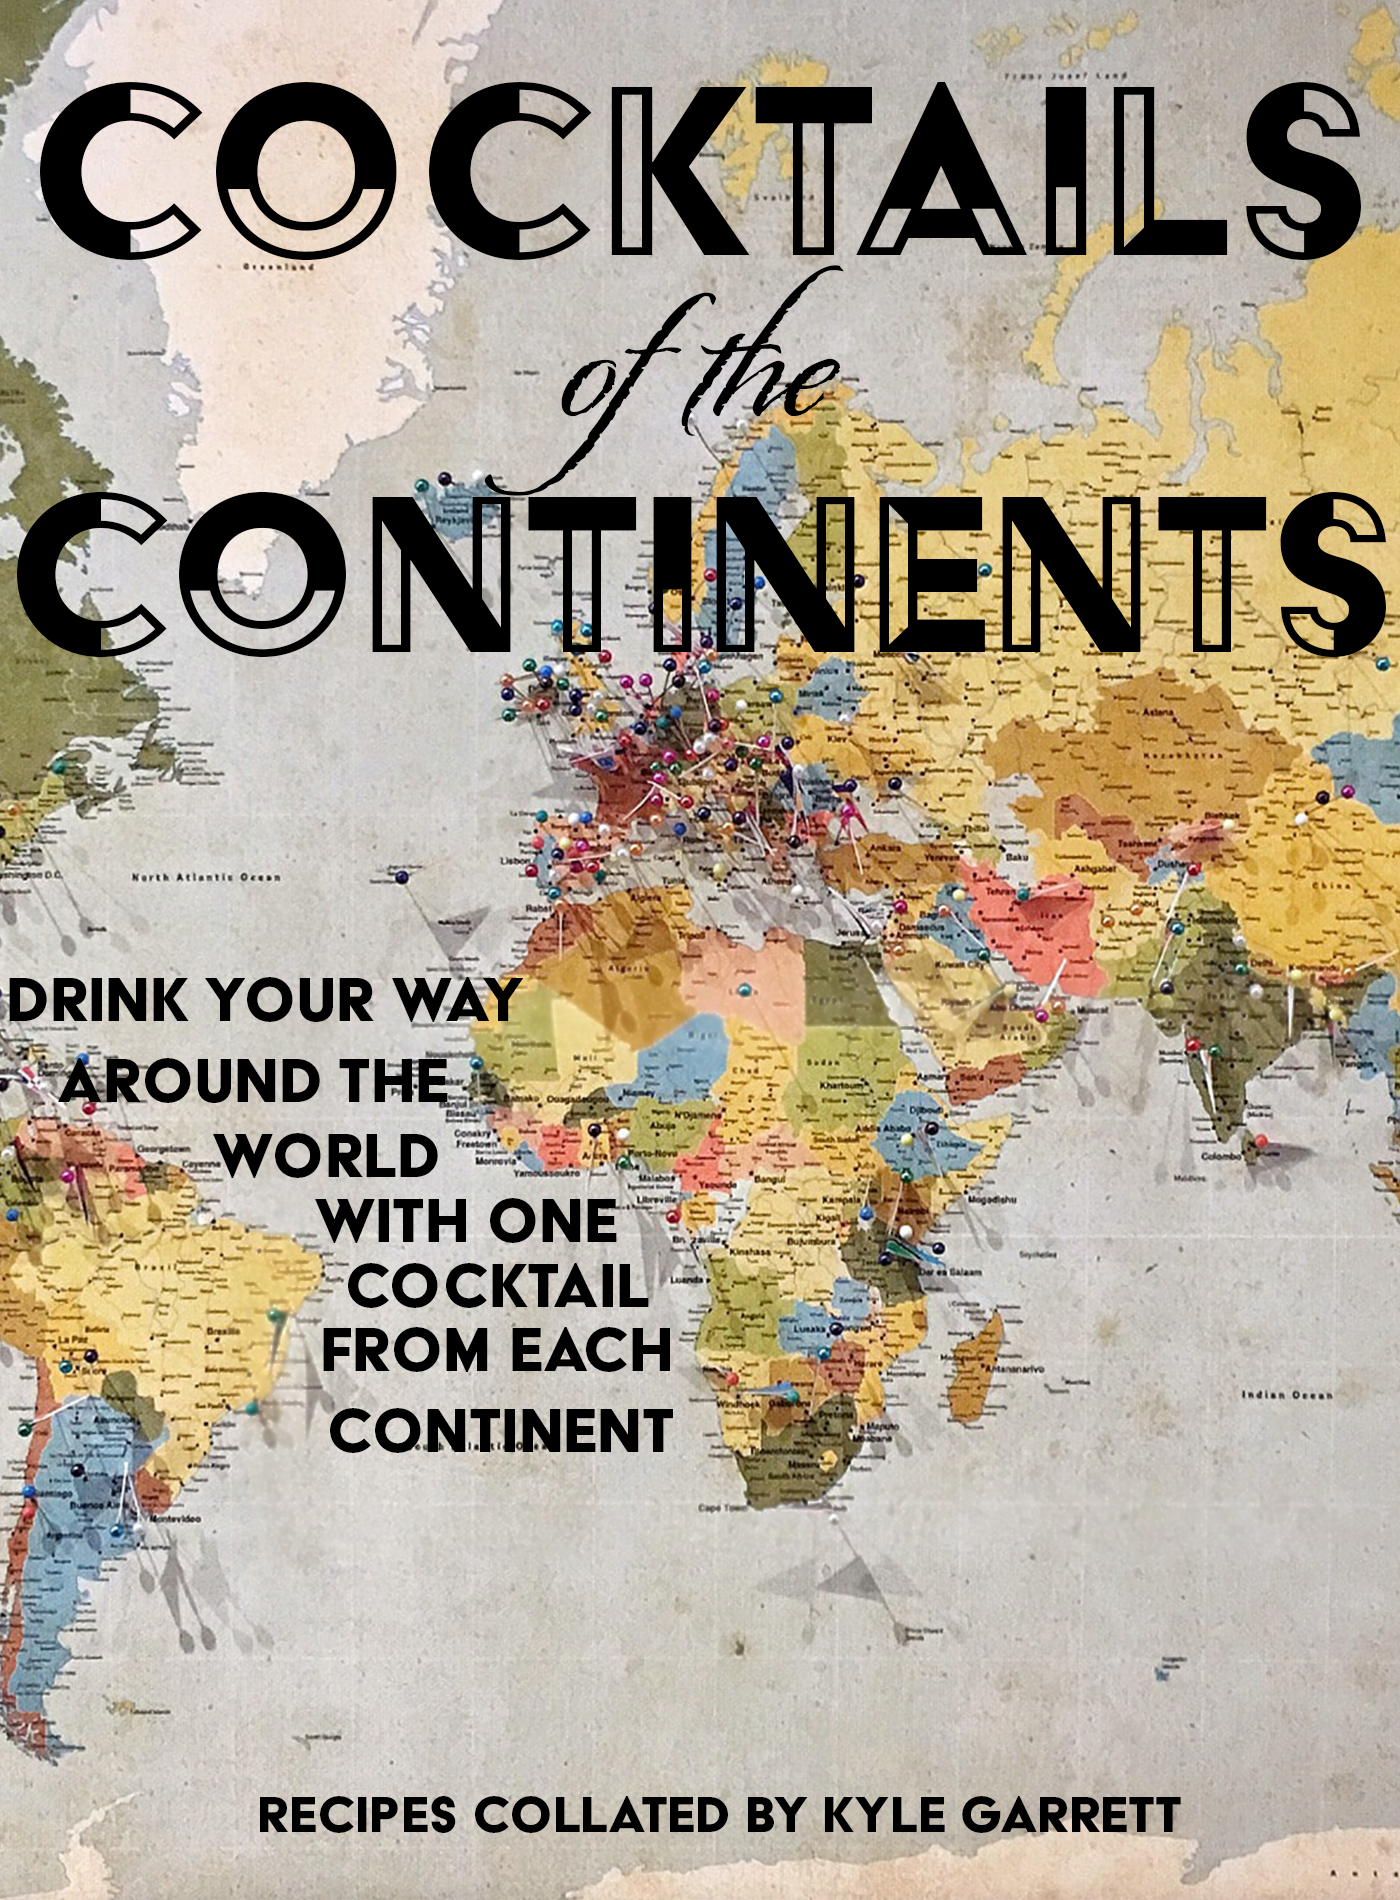 Cover of the book: Cocktails of the Continents.